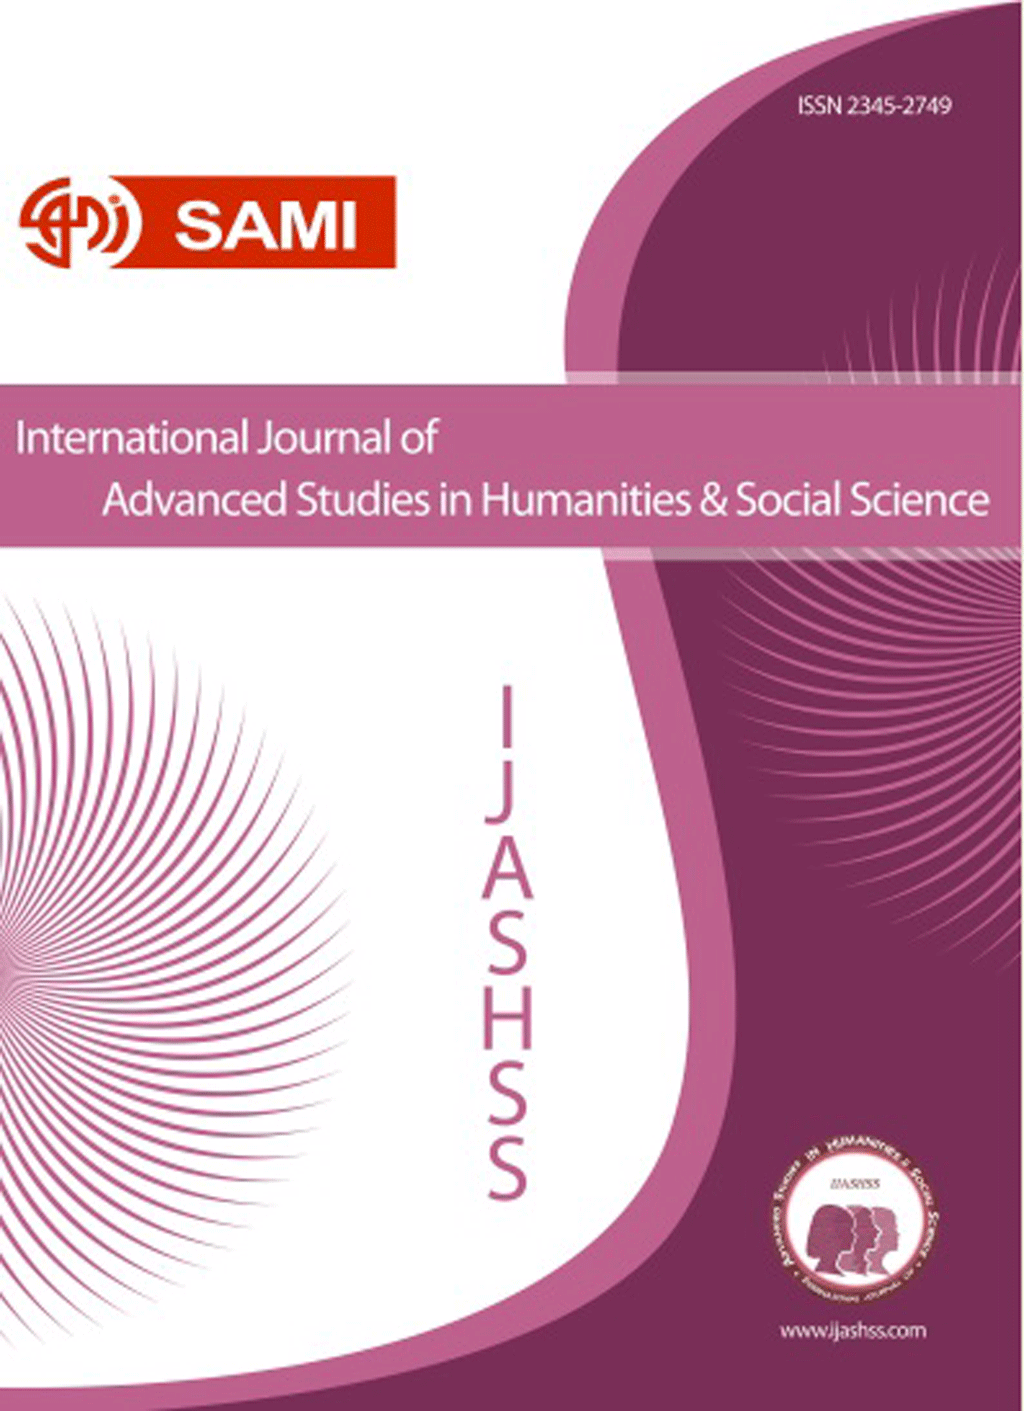 International Journal of Advanced Studies in Humanities and Social Science - January 2021, Volume 10 -  Issue 1